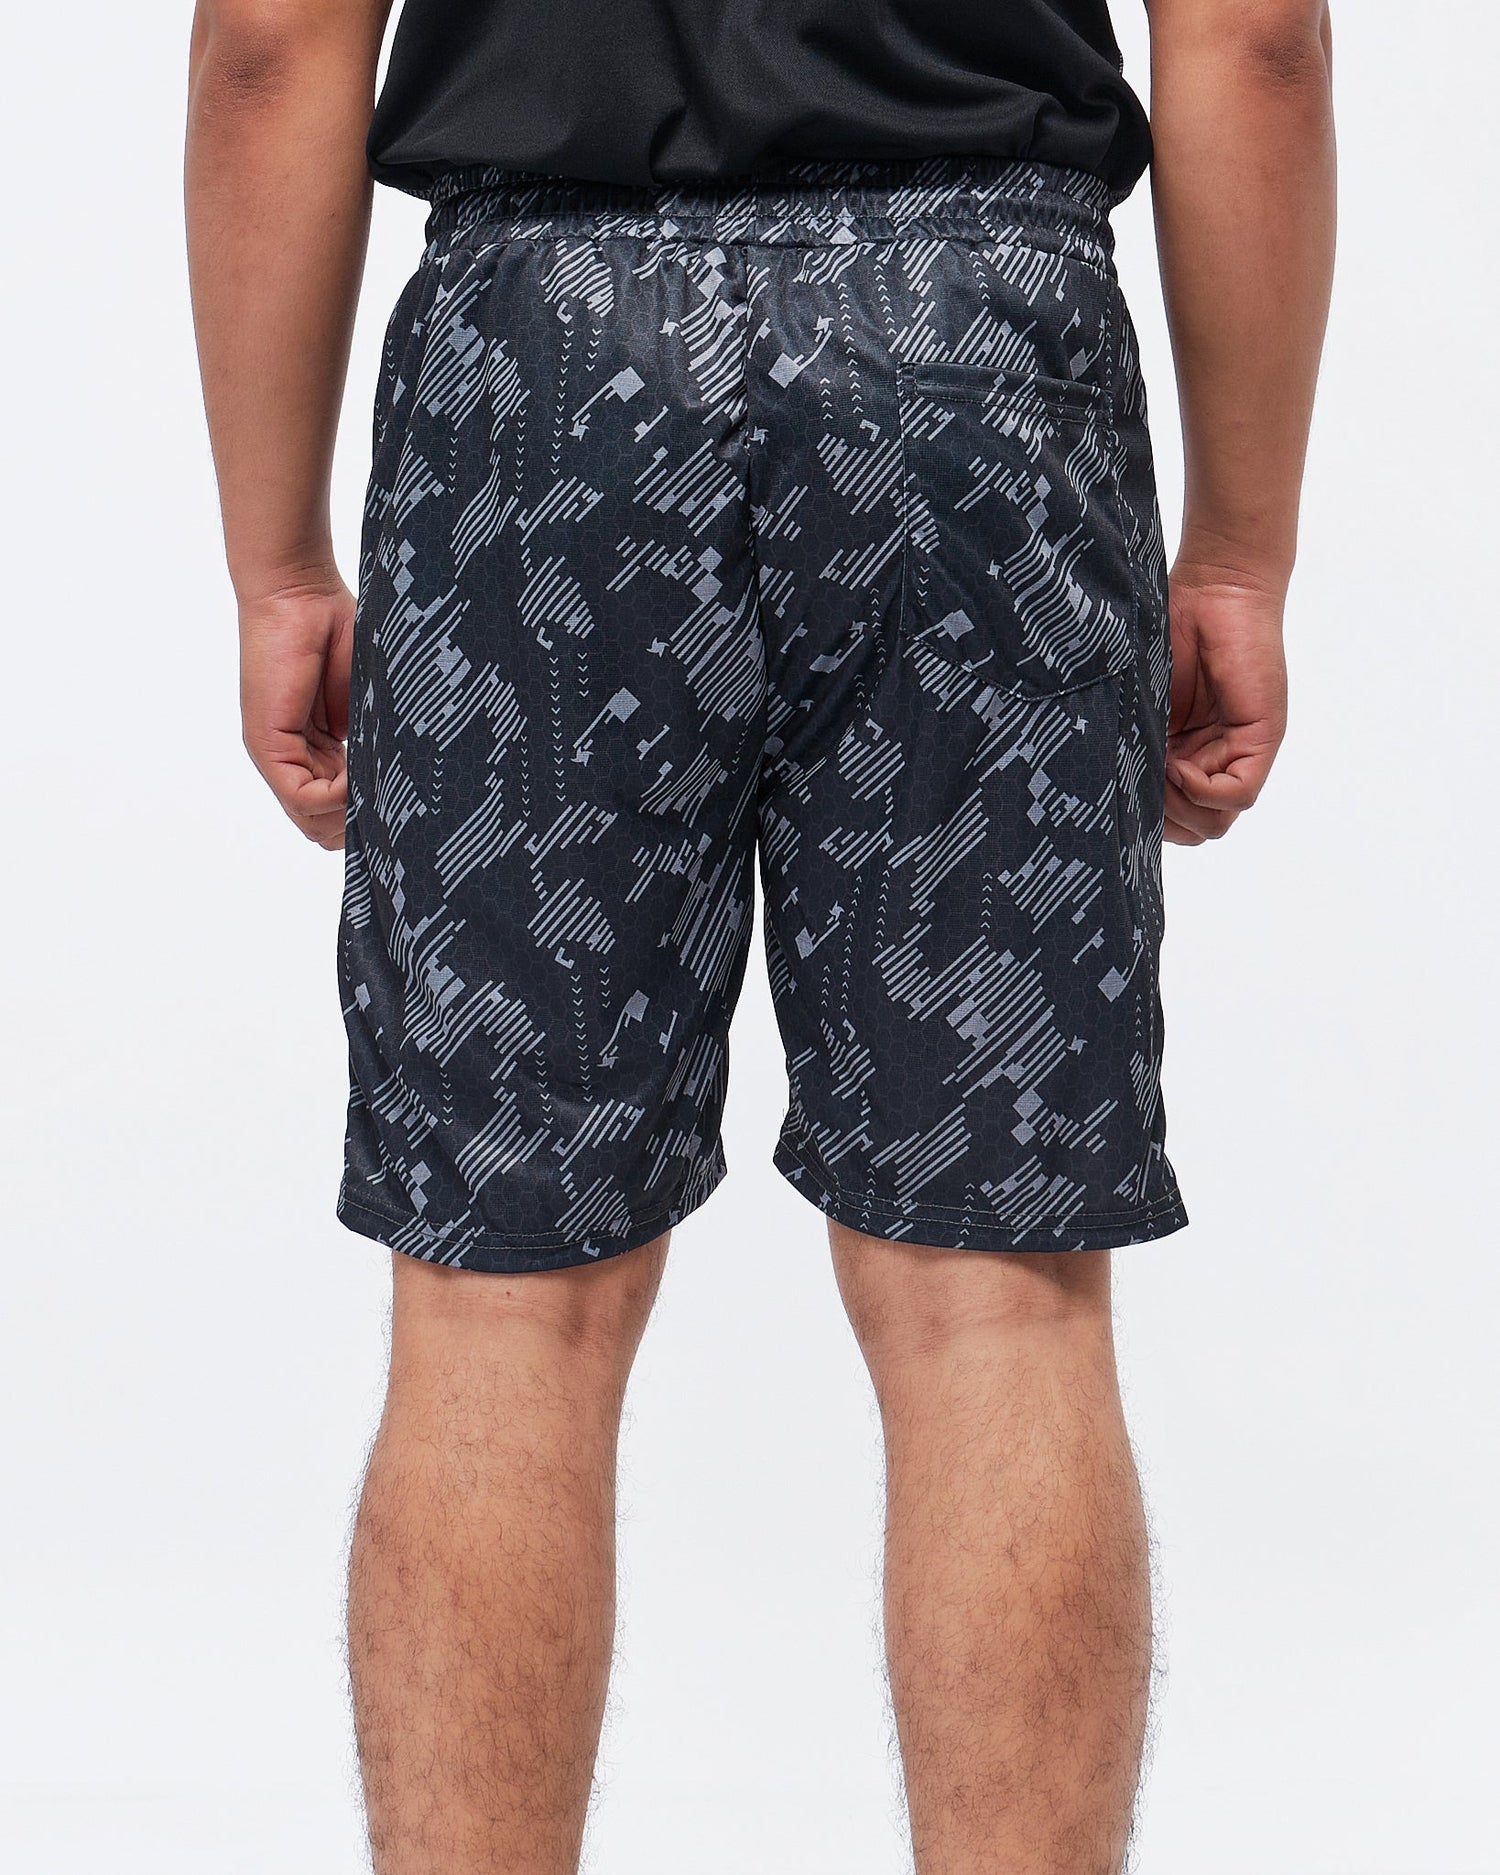 MOI OUTFIT-Texture Full Printed Men Sport Shorts 13.90